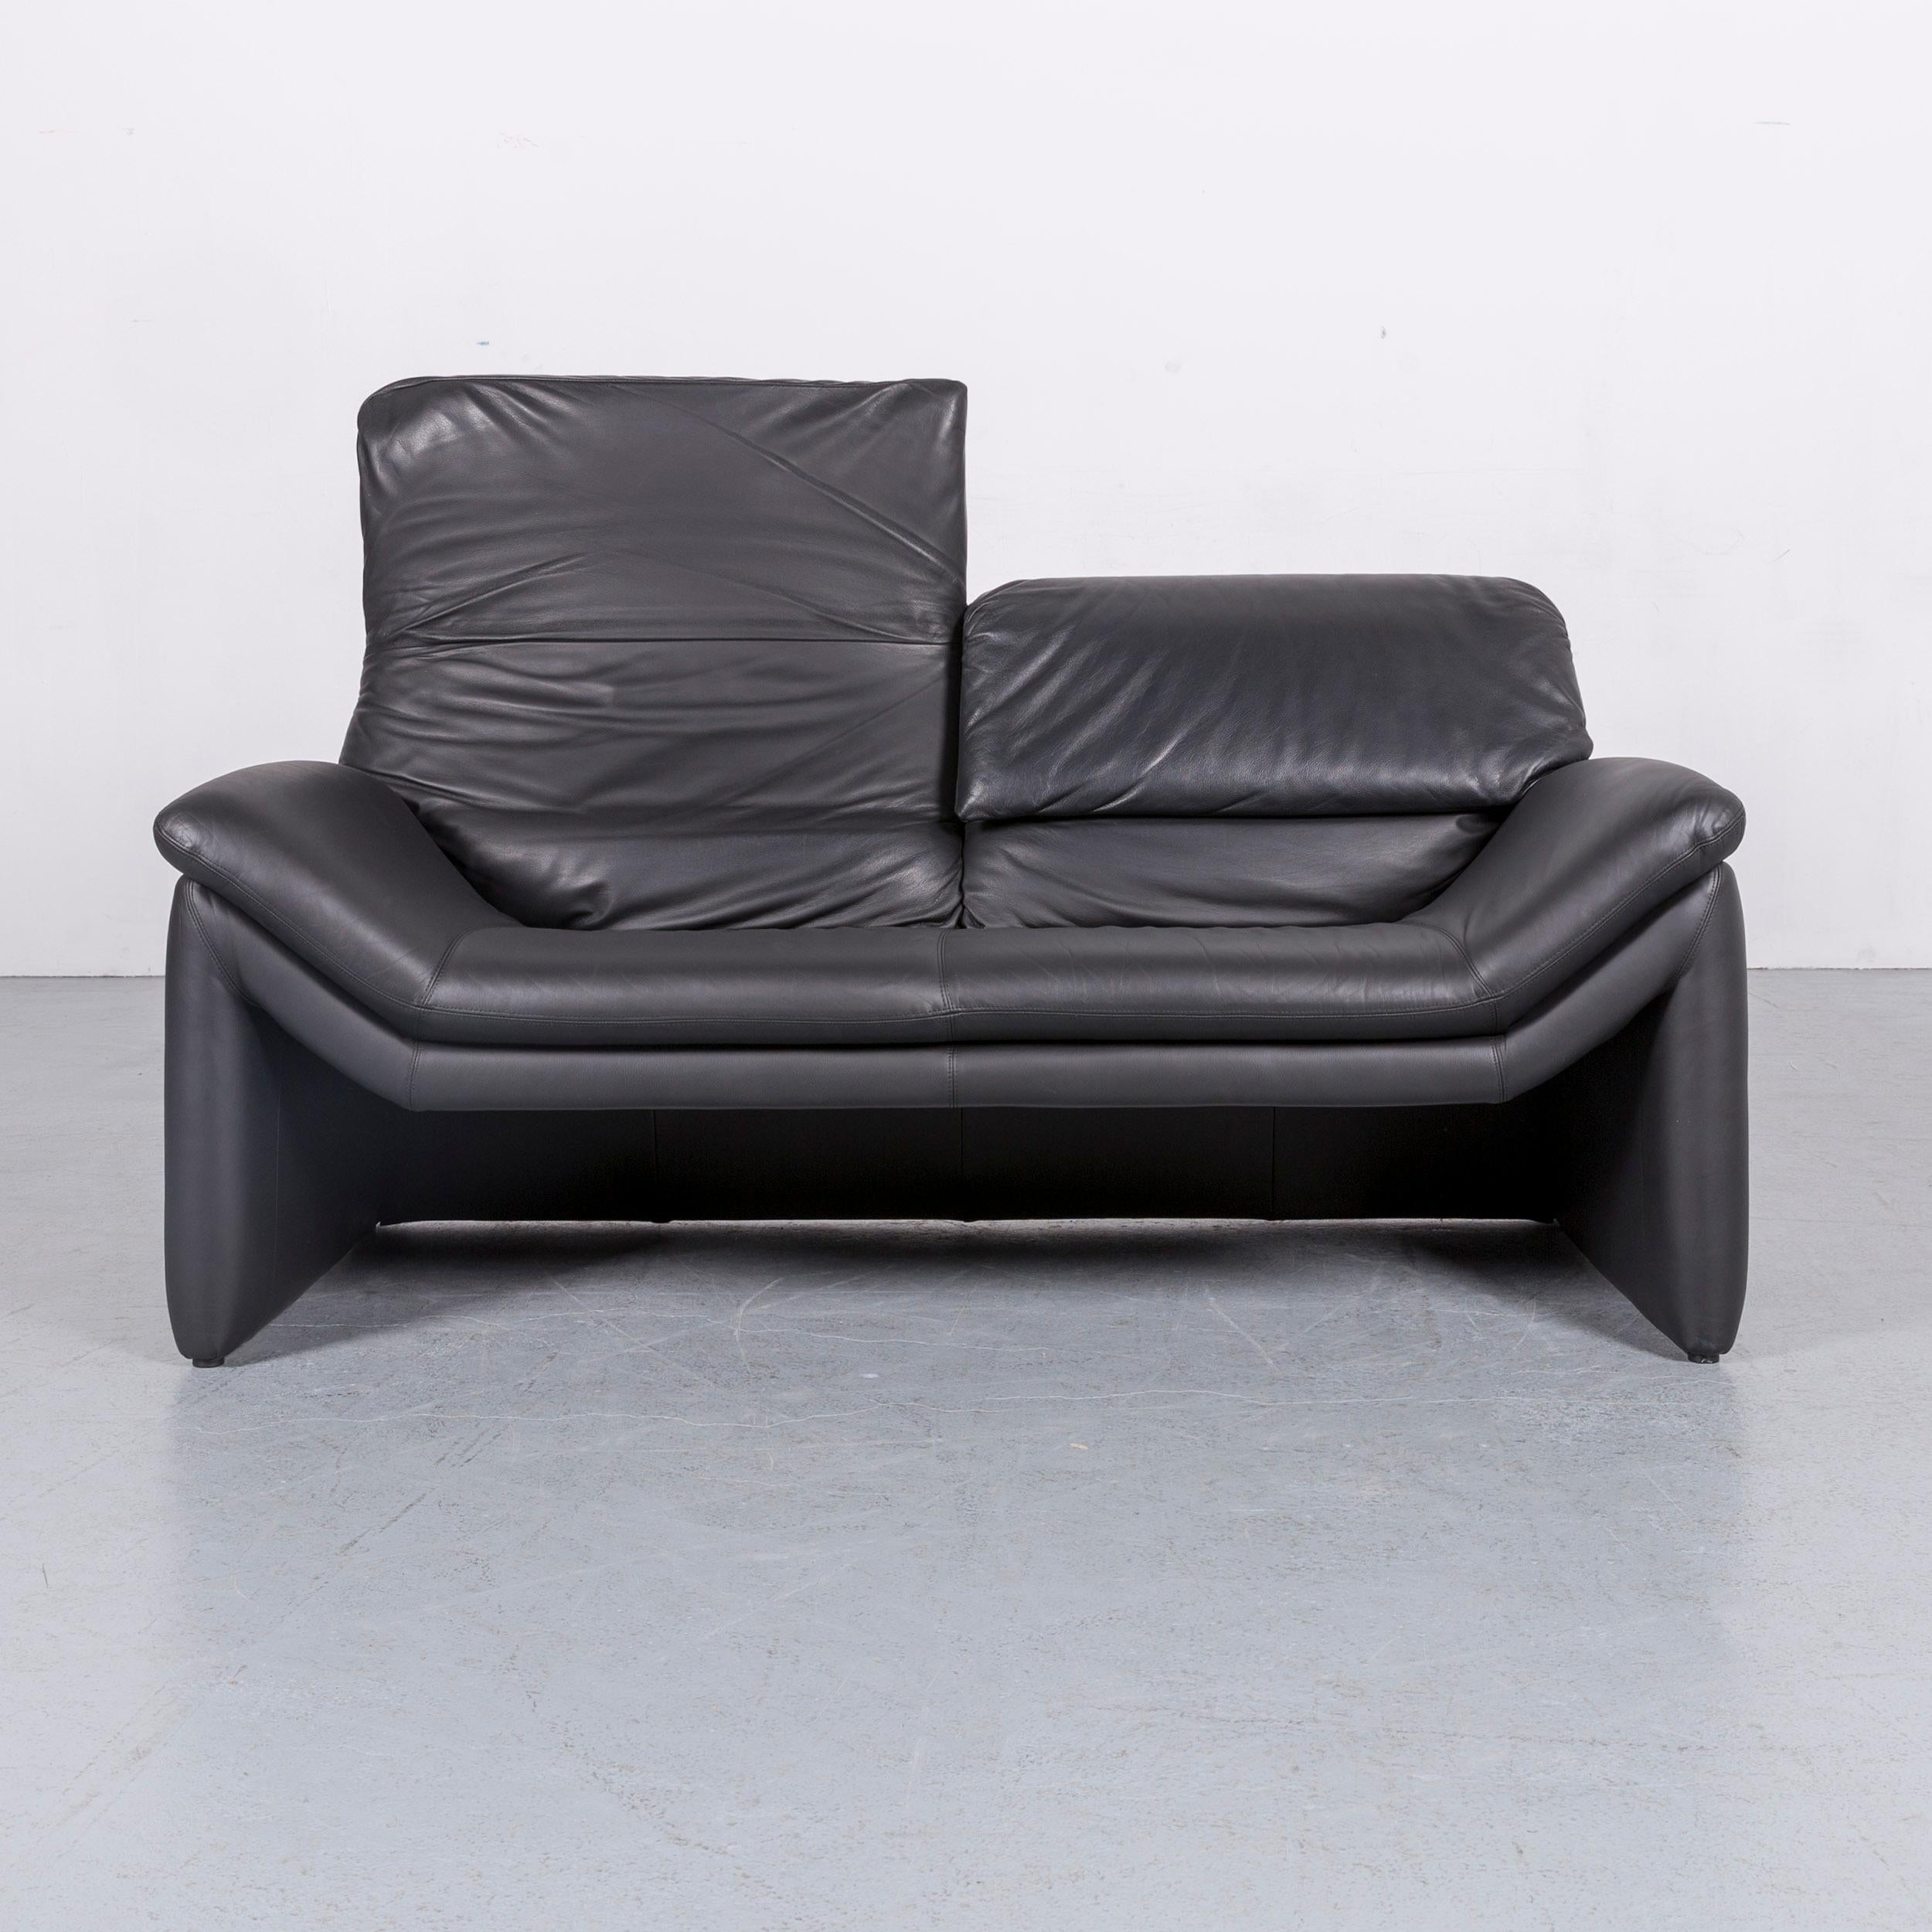 We bring to you an designer leather sofa black two-seat function.